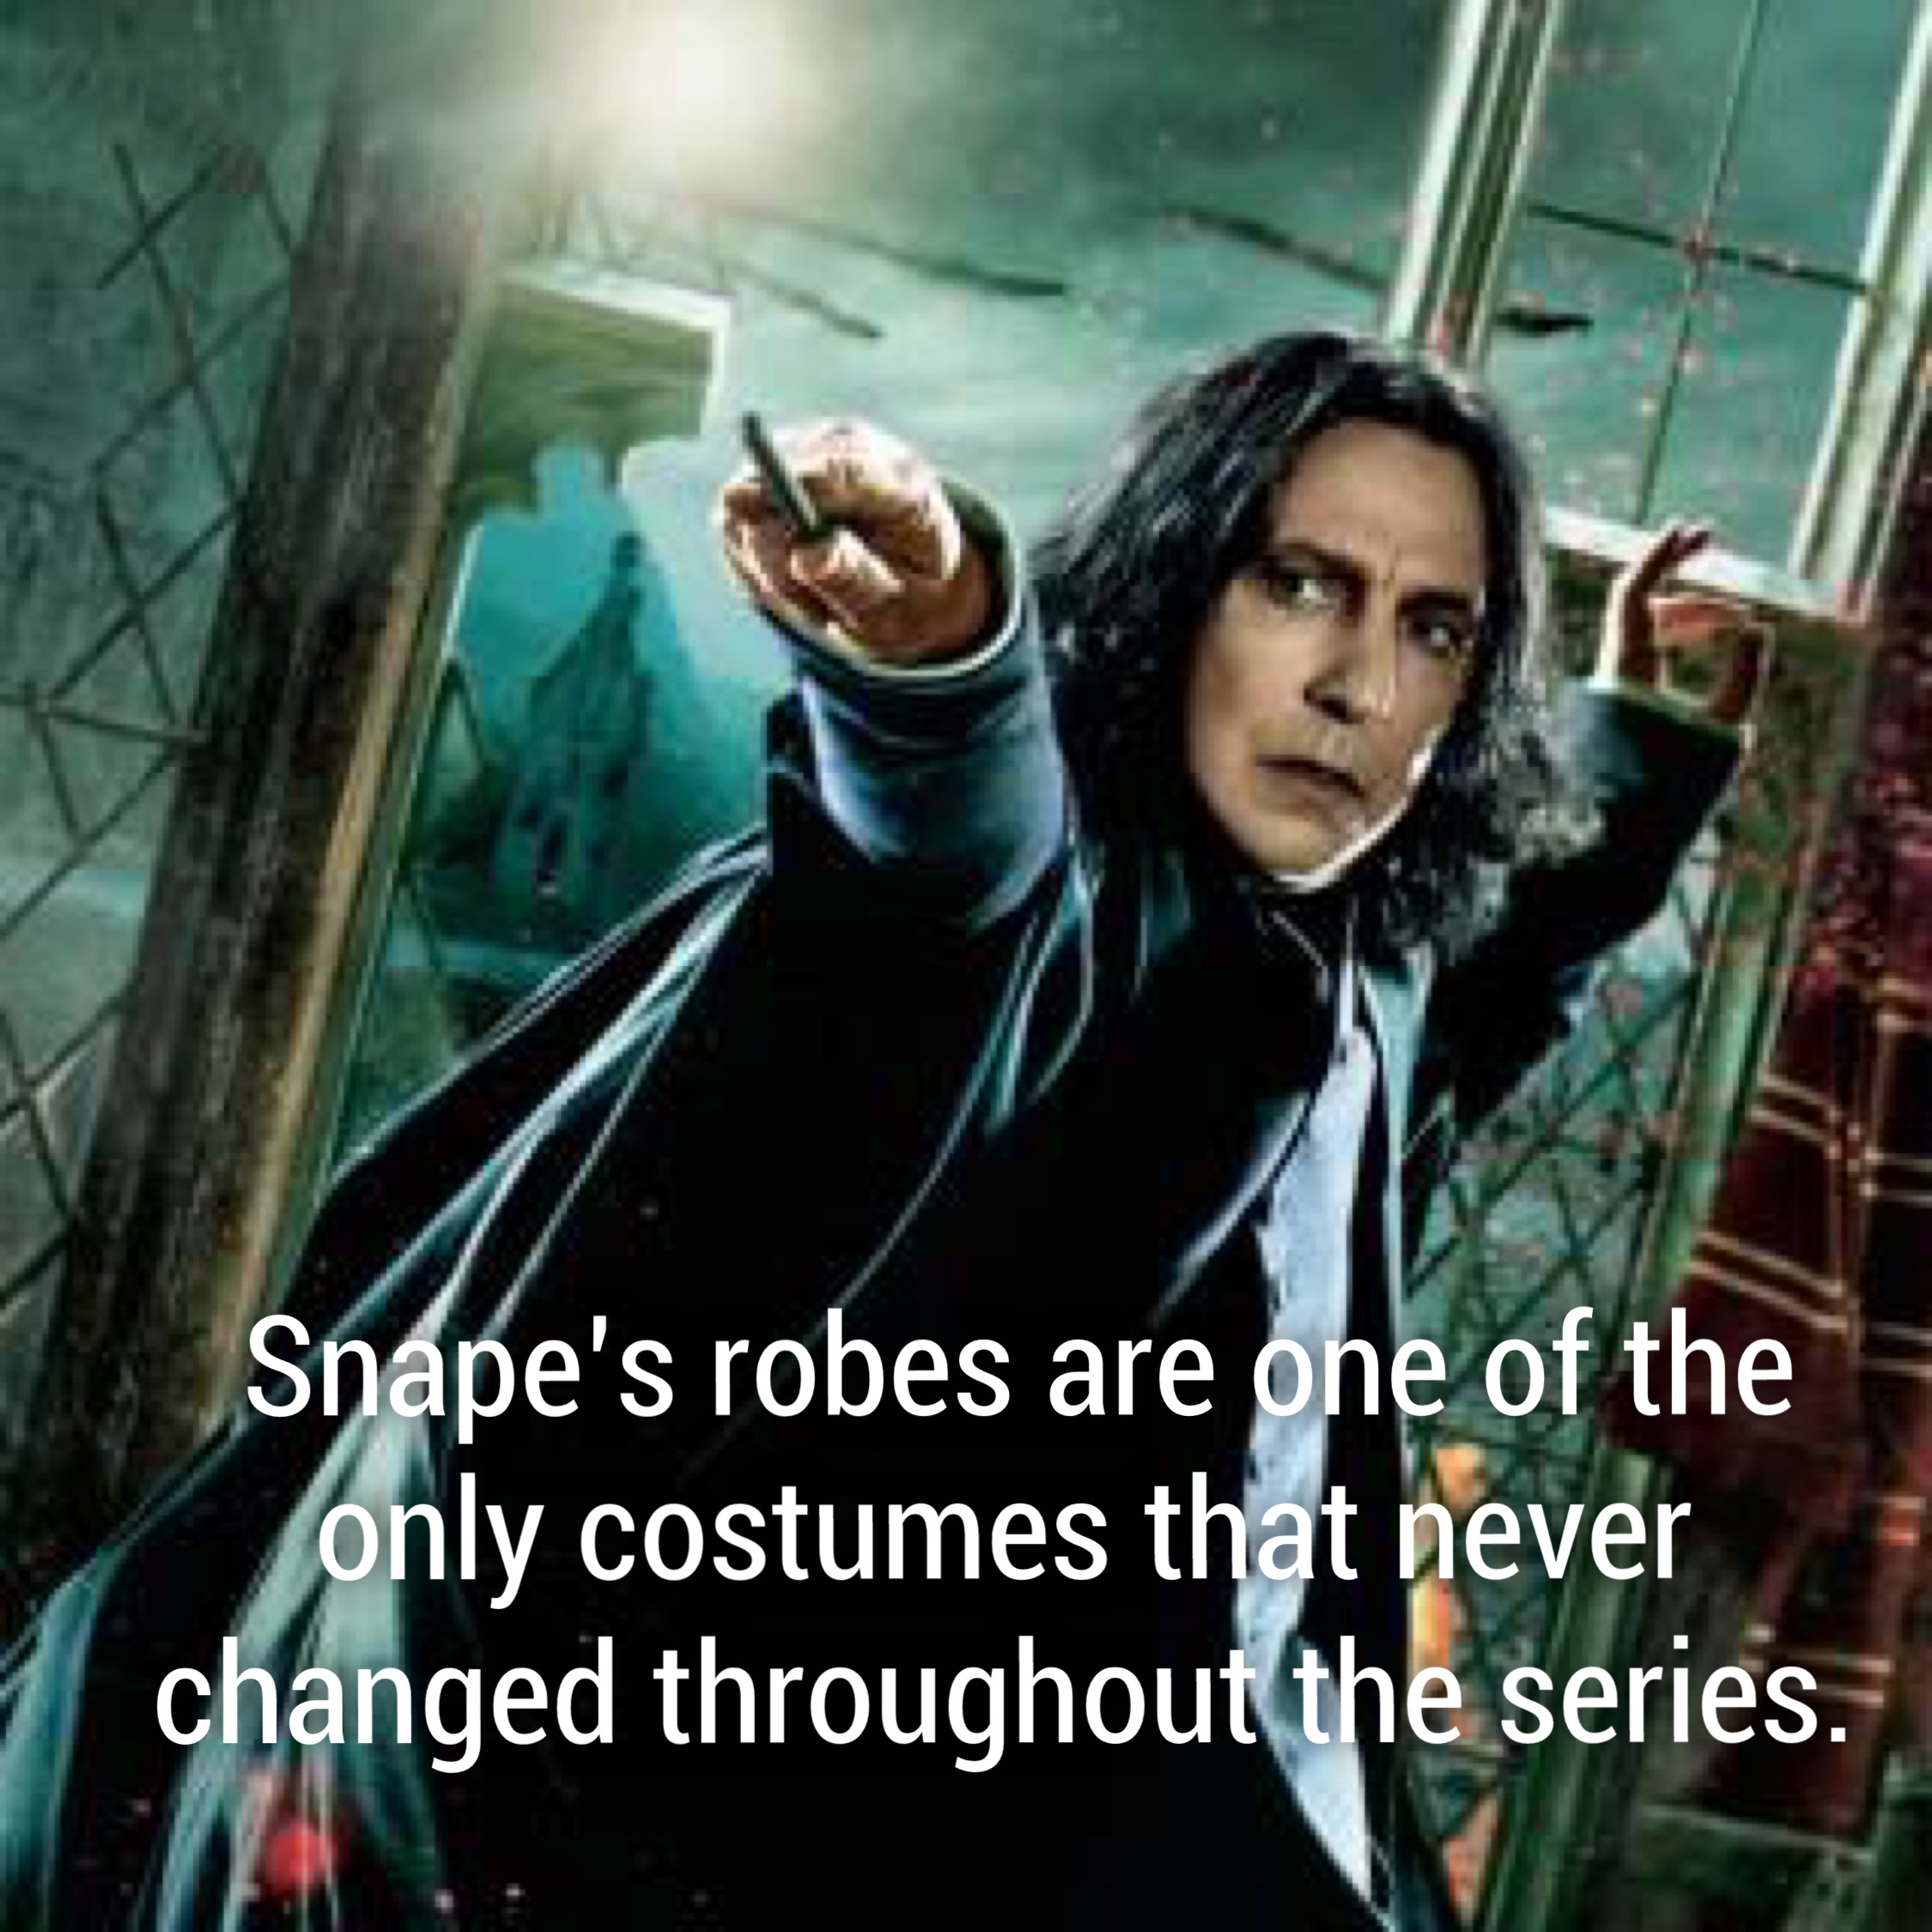 harry potter snape - Snape's robes are one of the only costumes that never changed throughout the series.